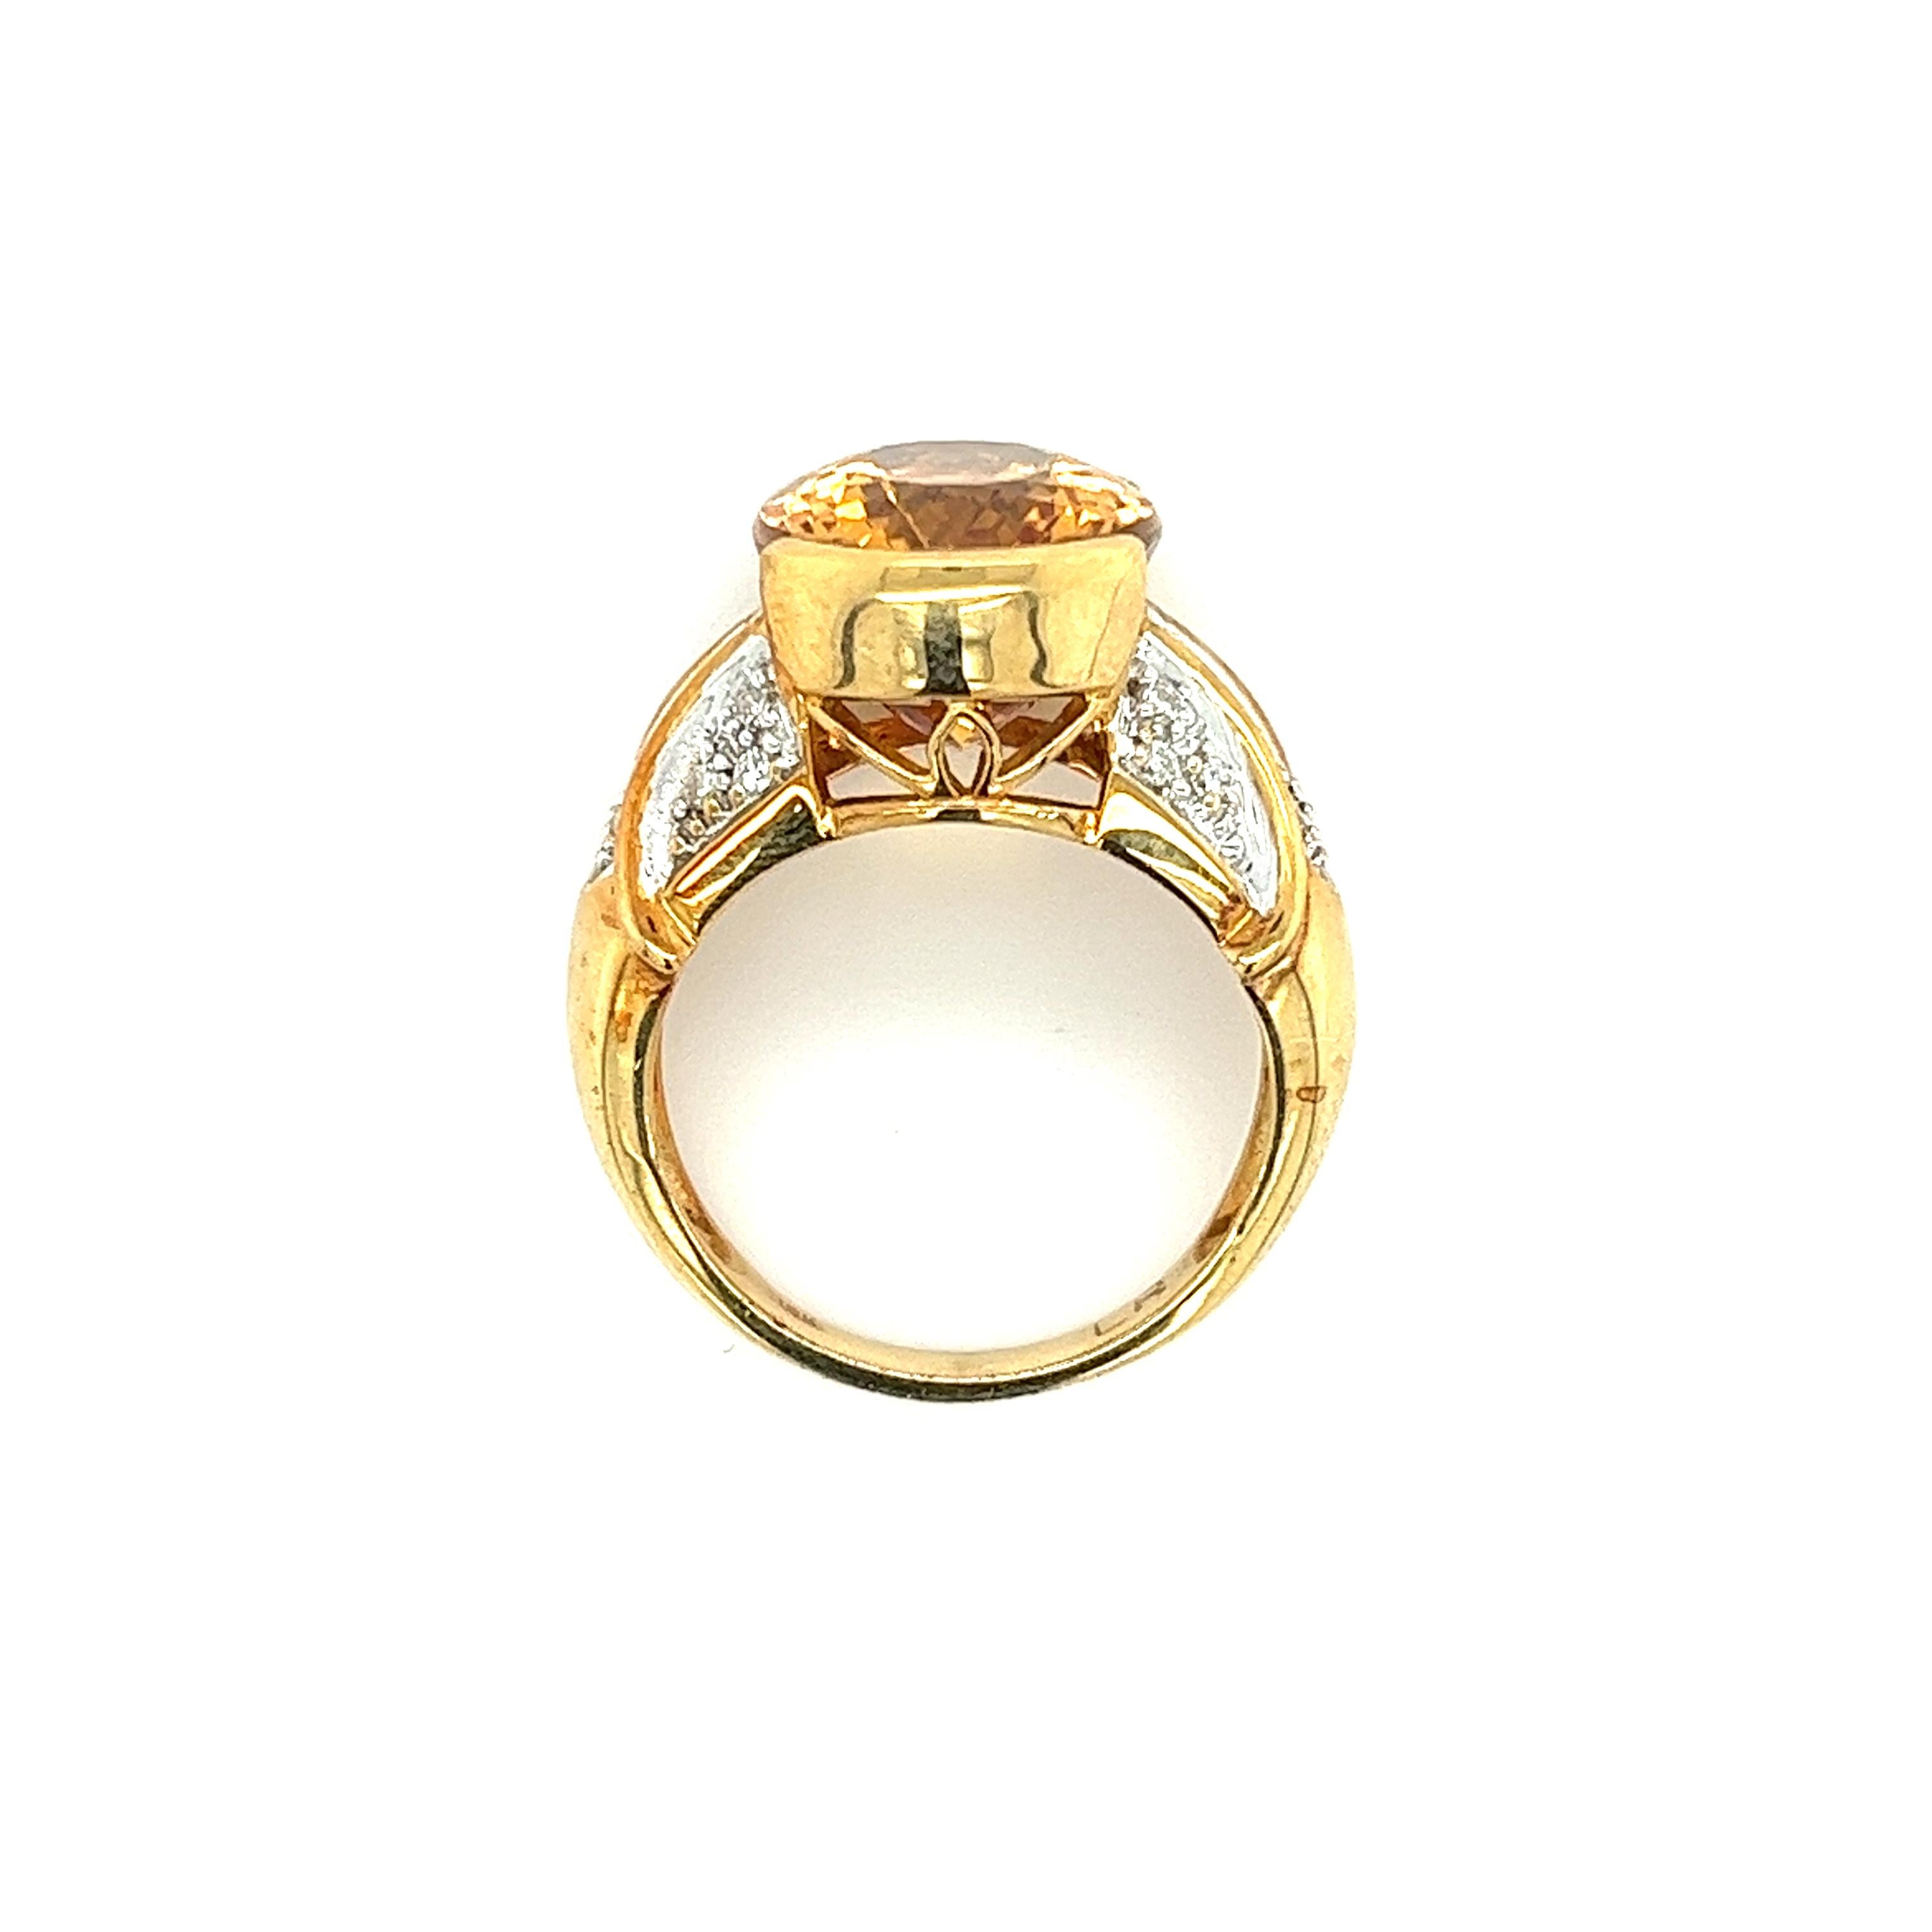 Vintage semi precious gemstone ring boasting an oval cut yellow topaz center stone, featuring round cut diamond side stones. All secured through a bezel and prong set 18k yellow and white gold mounting. The ring bears a wide frame, heavy weight, and